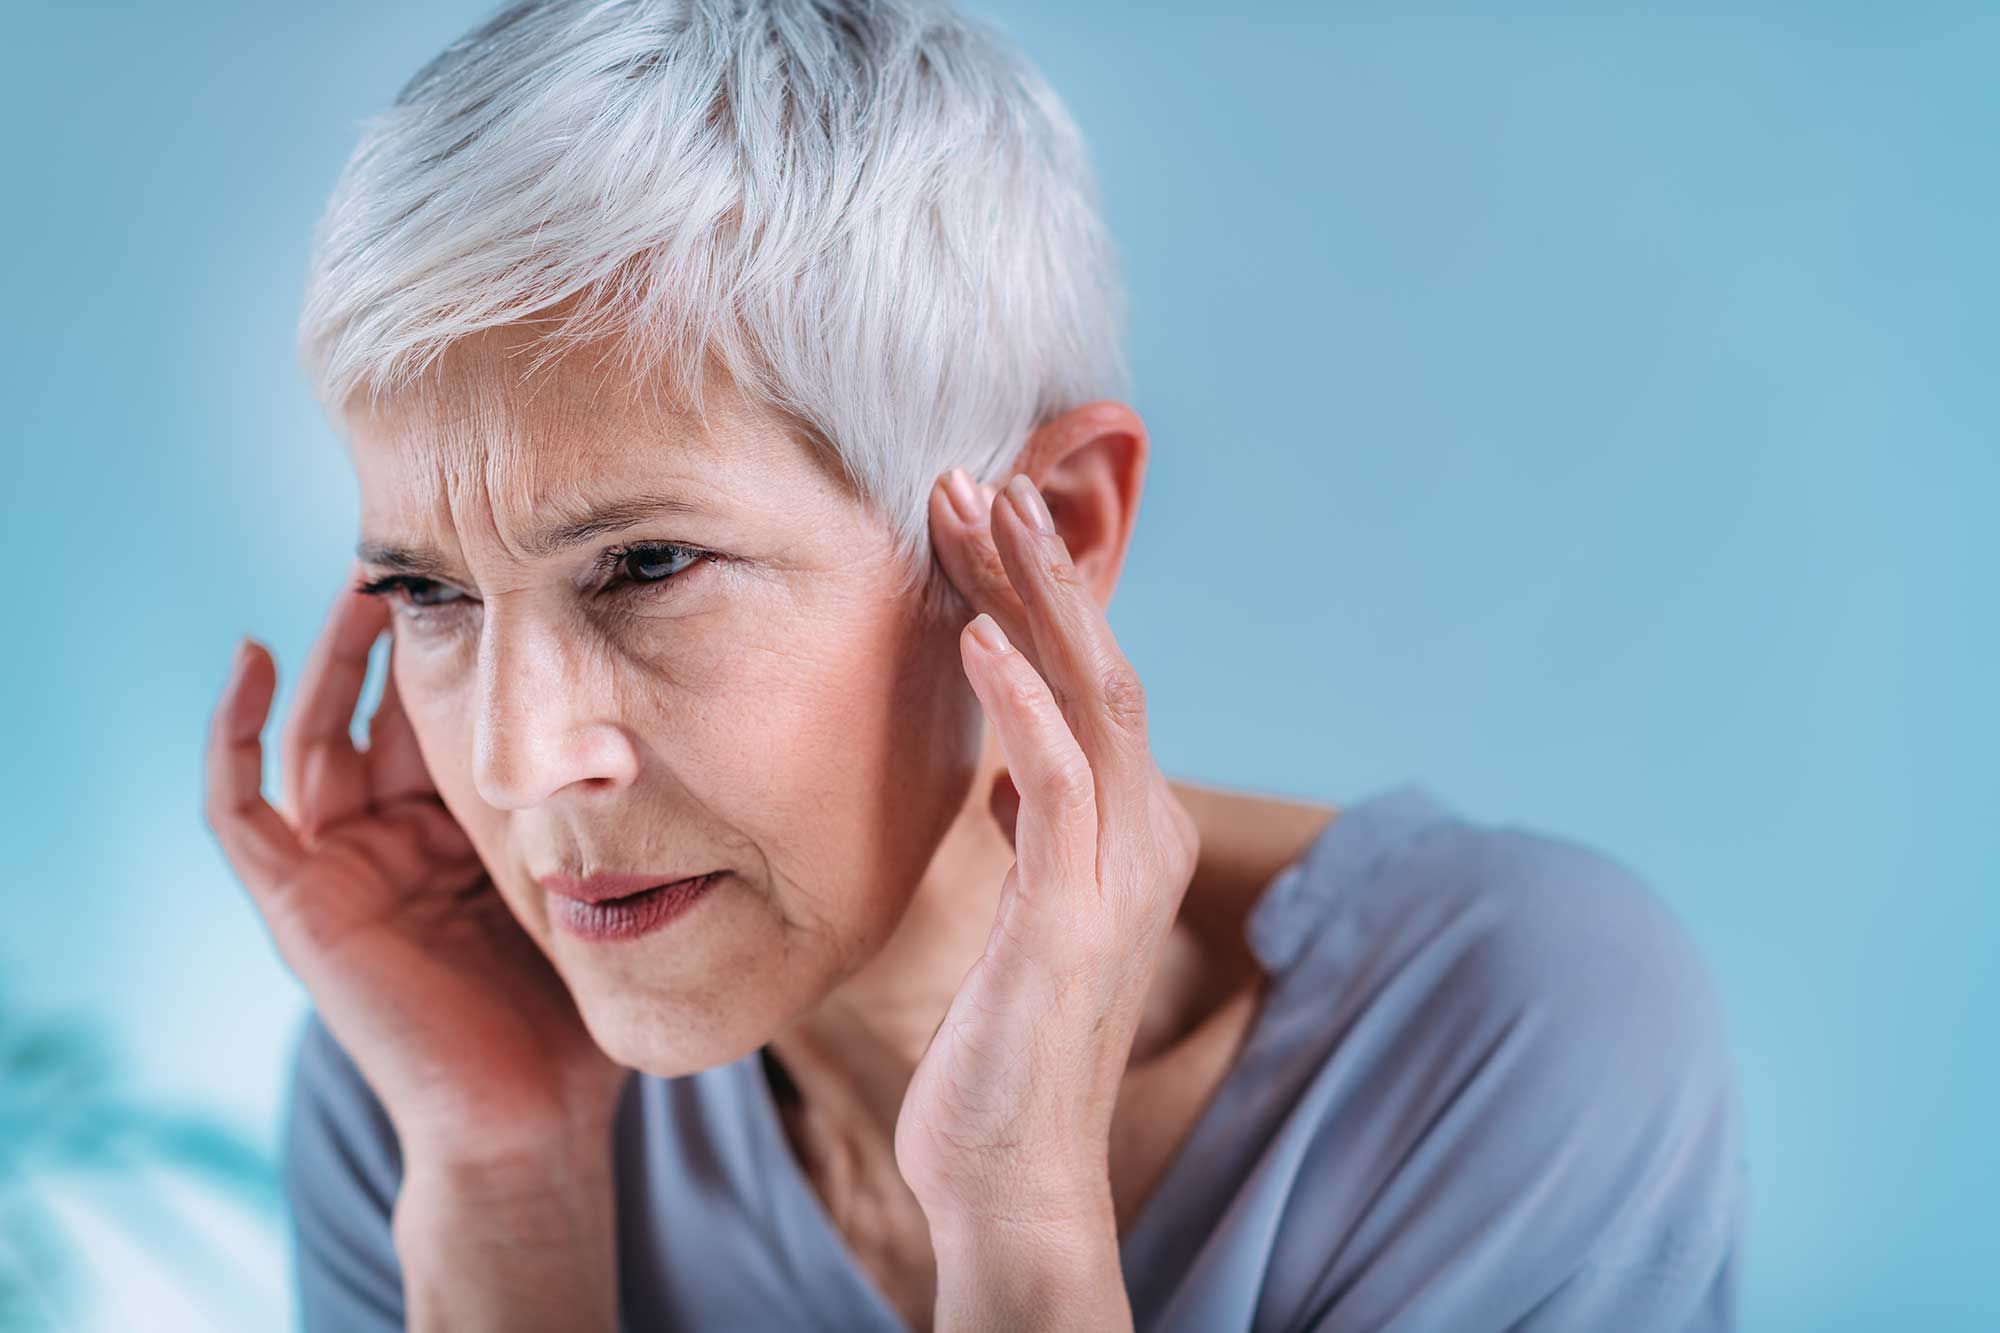 A Women Troubled with Tinnitus